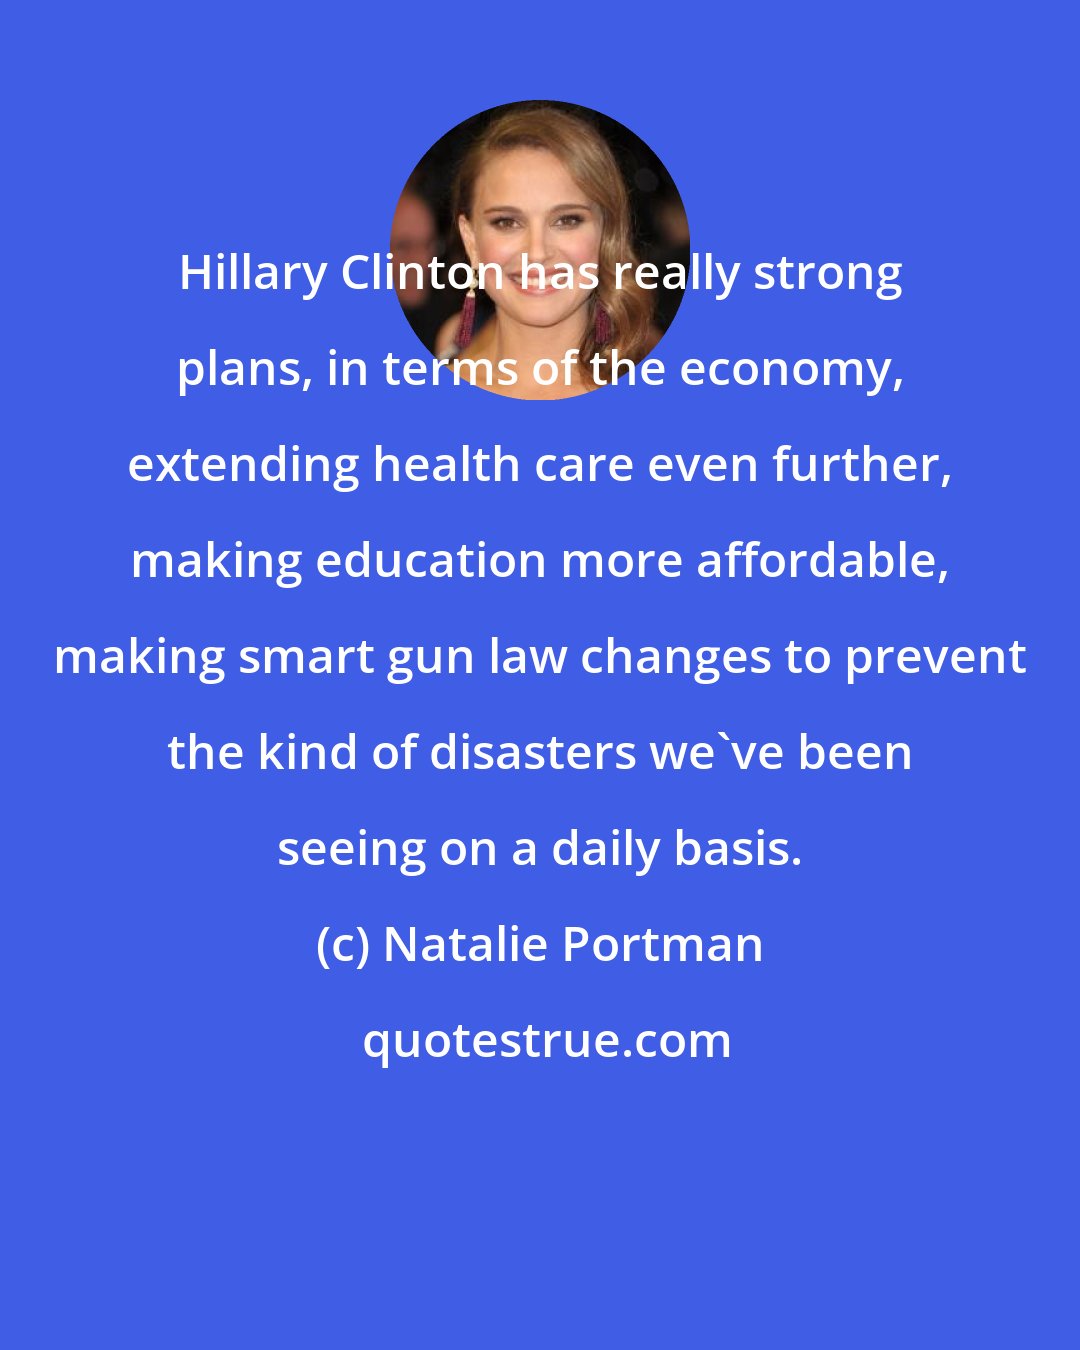 Natalie Portman: Hillary Clinton has really strong plans, in terms of the economy, extending health care even further, making education more affordable, making smart gun law changes to prevent the kind of disasters we've been seeing on a daily basis.